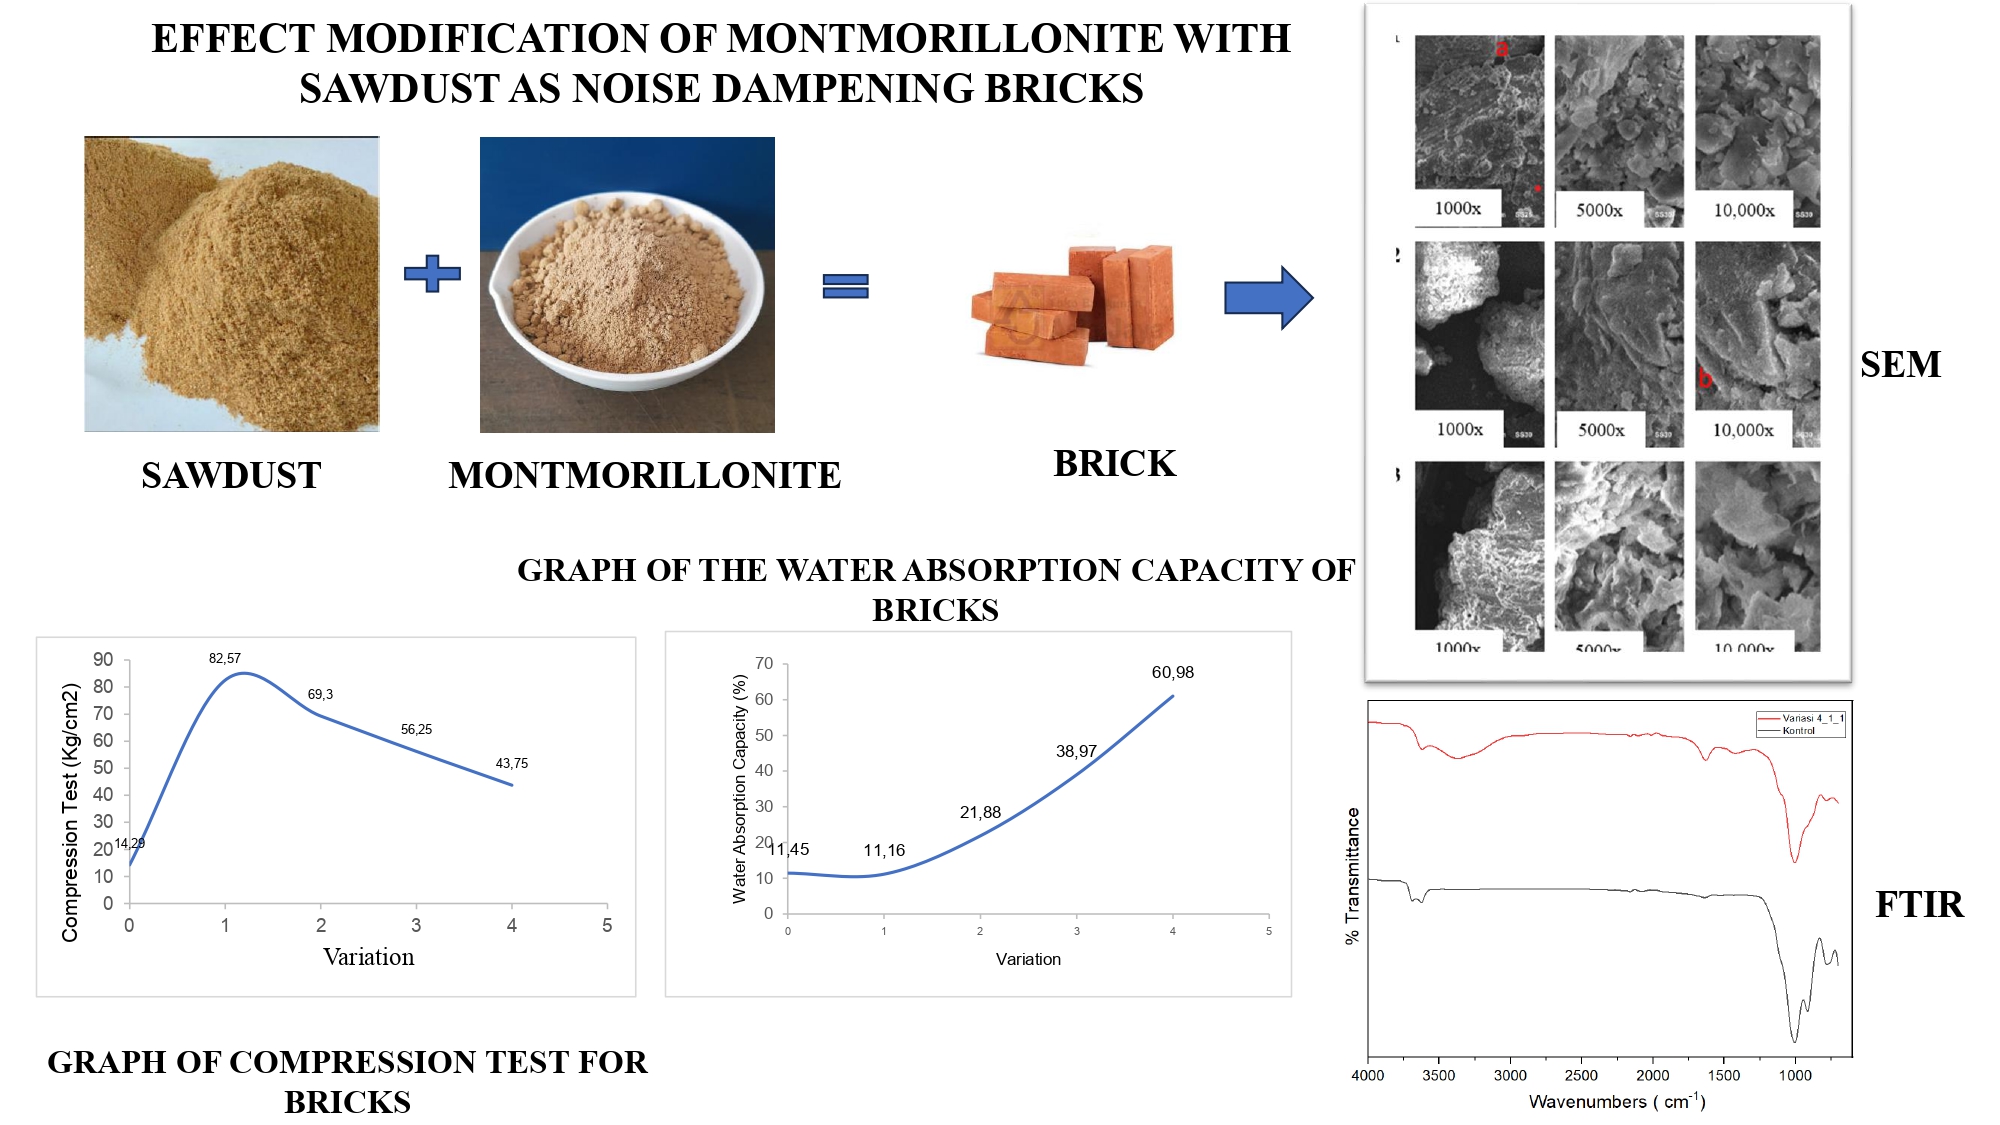 Modification of montmorillonite with sawdust as noise dampening bricks